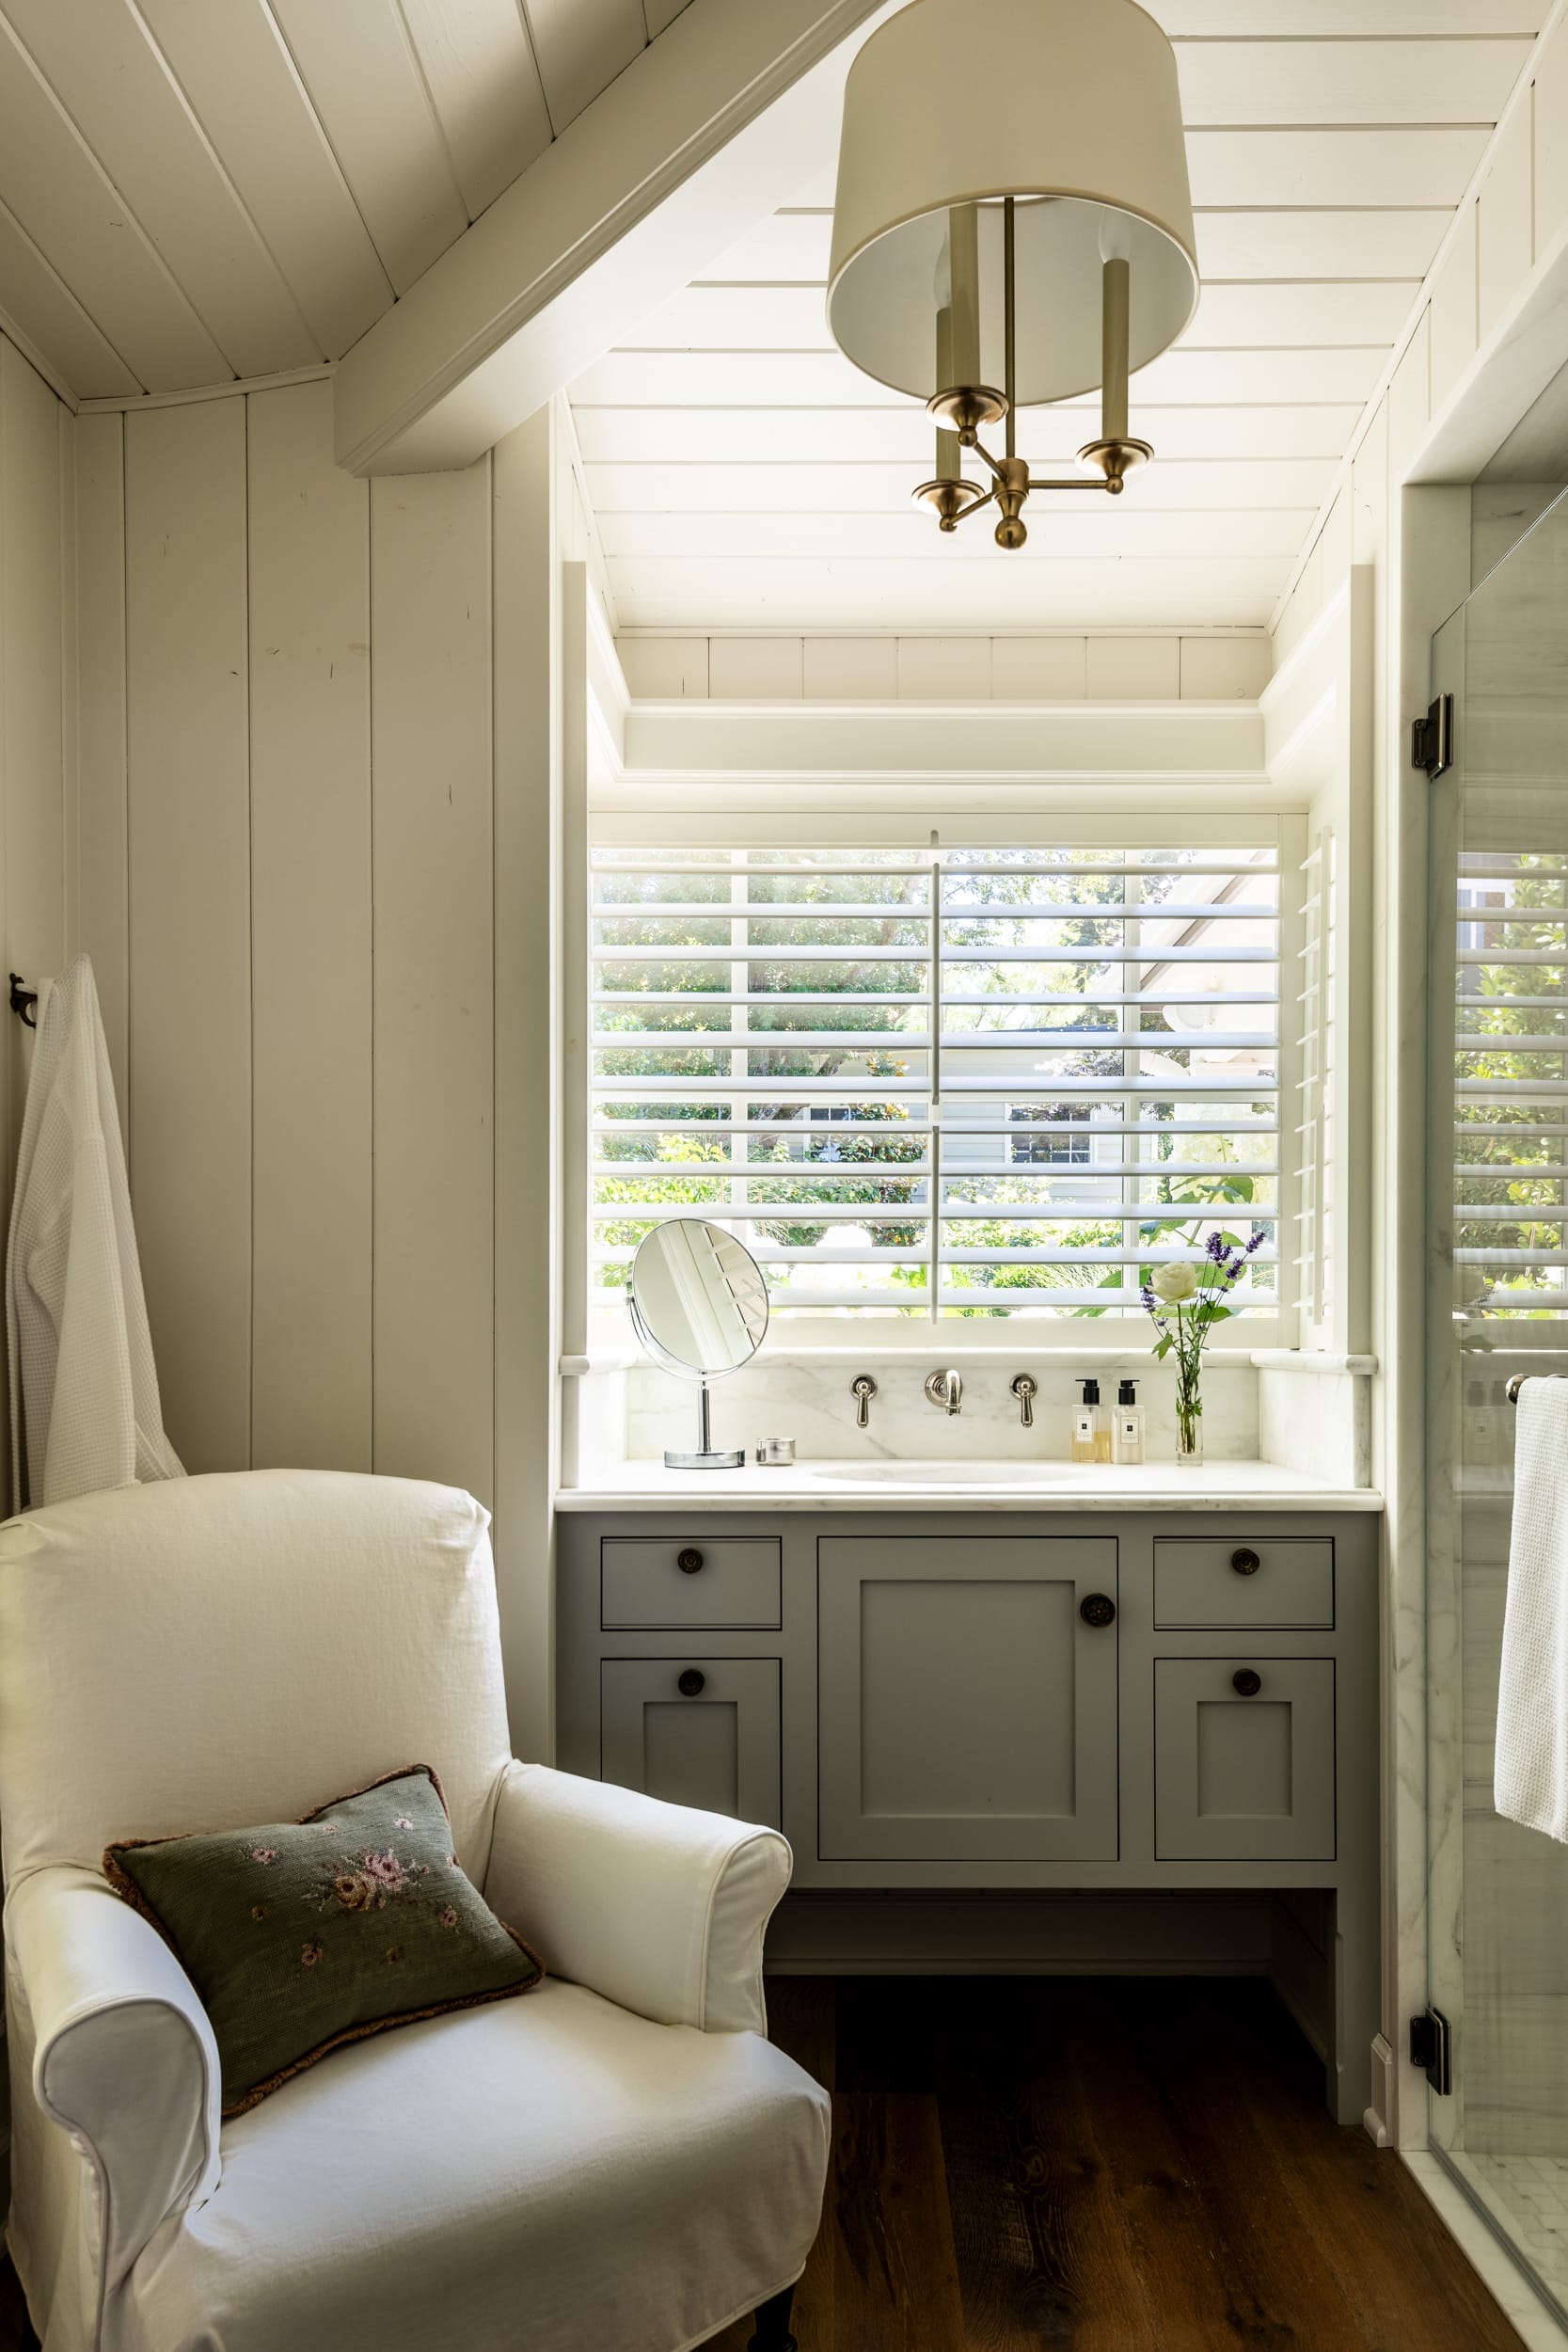 A bathroom with a white chair and a window.